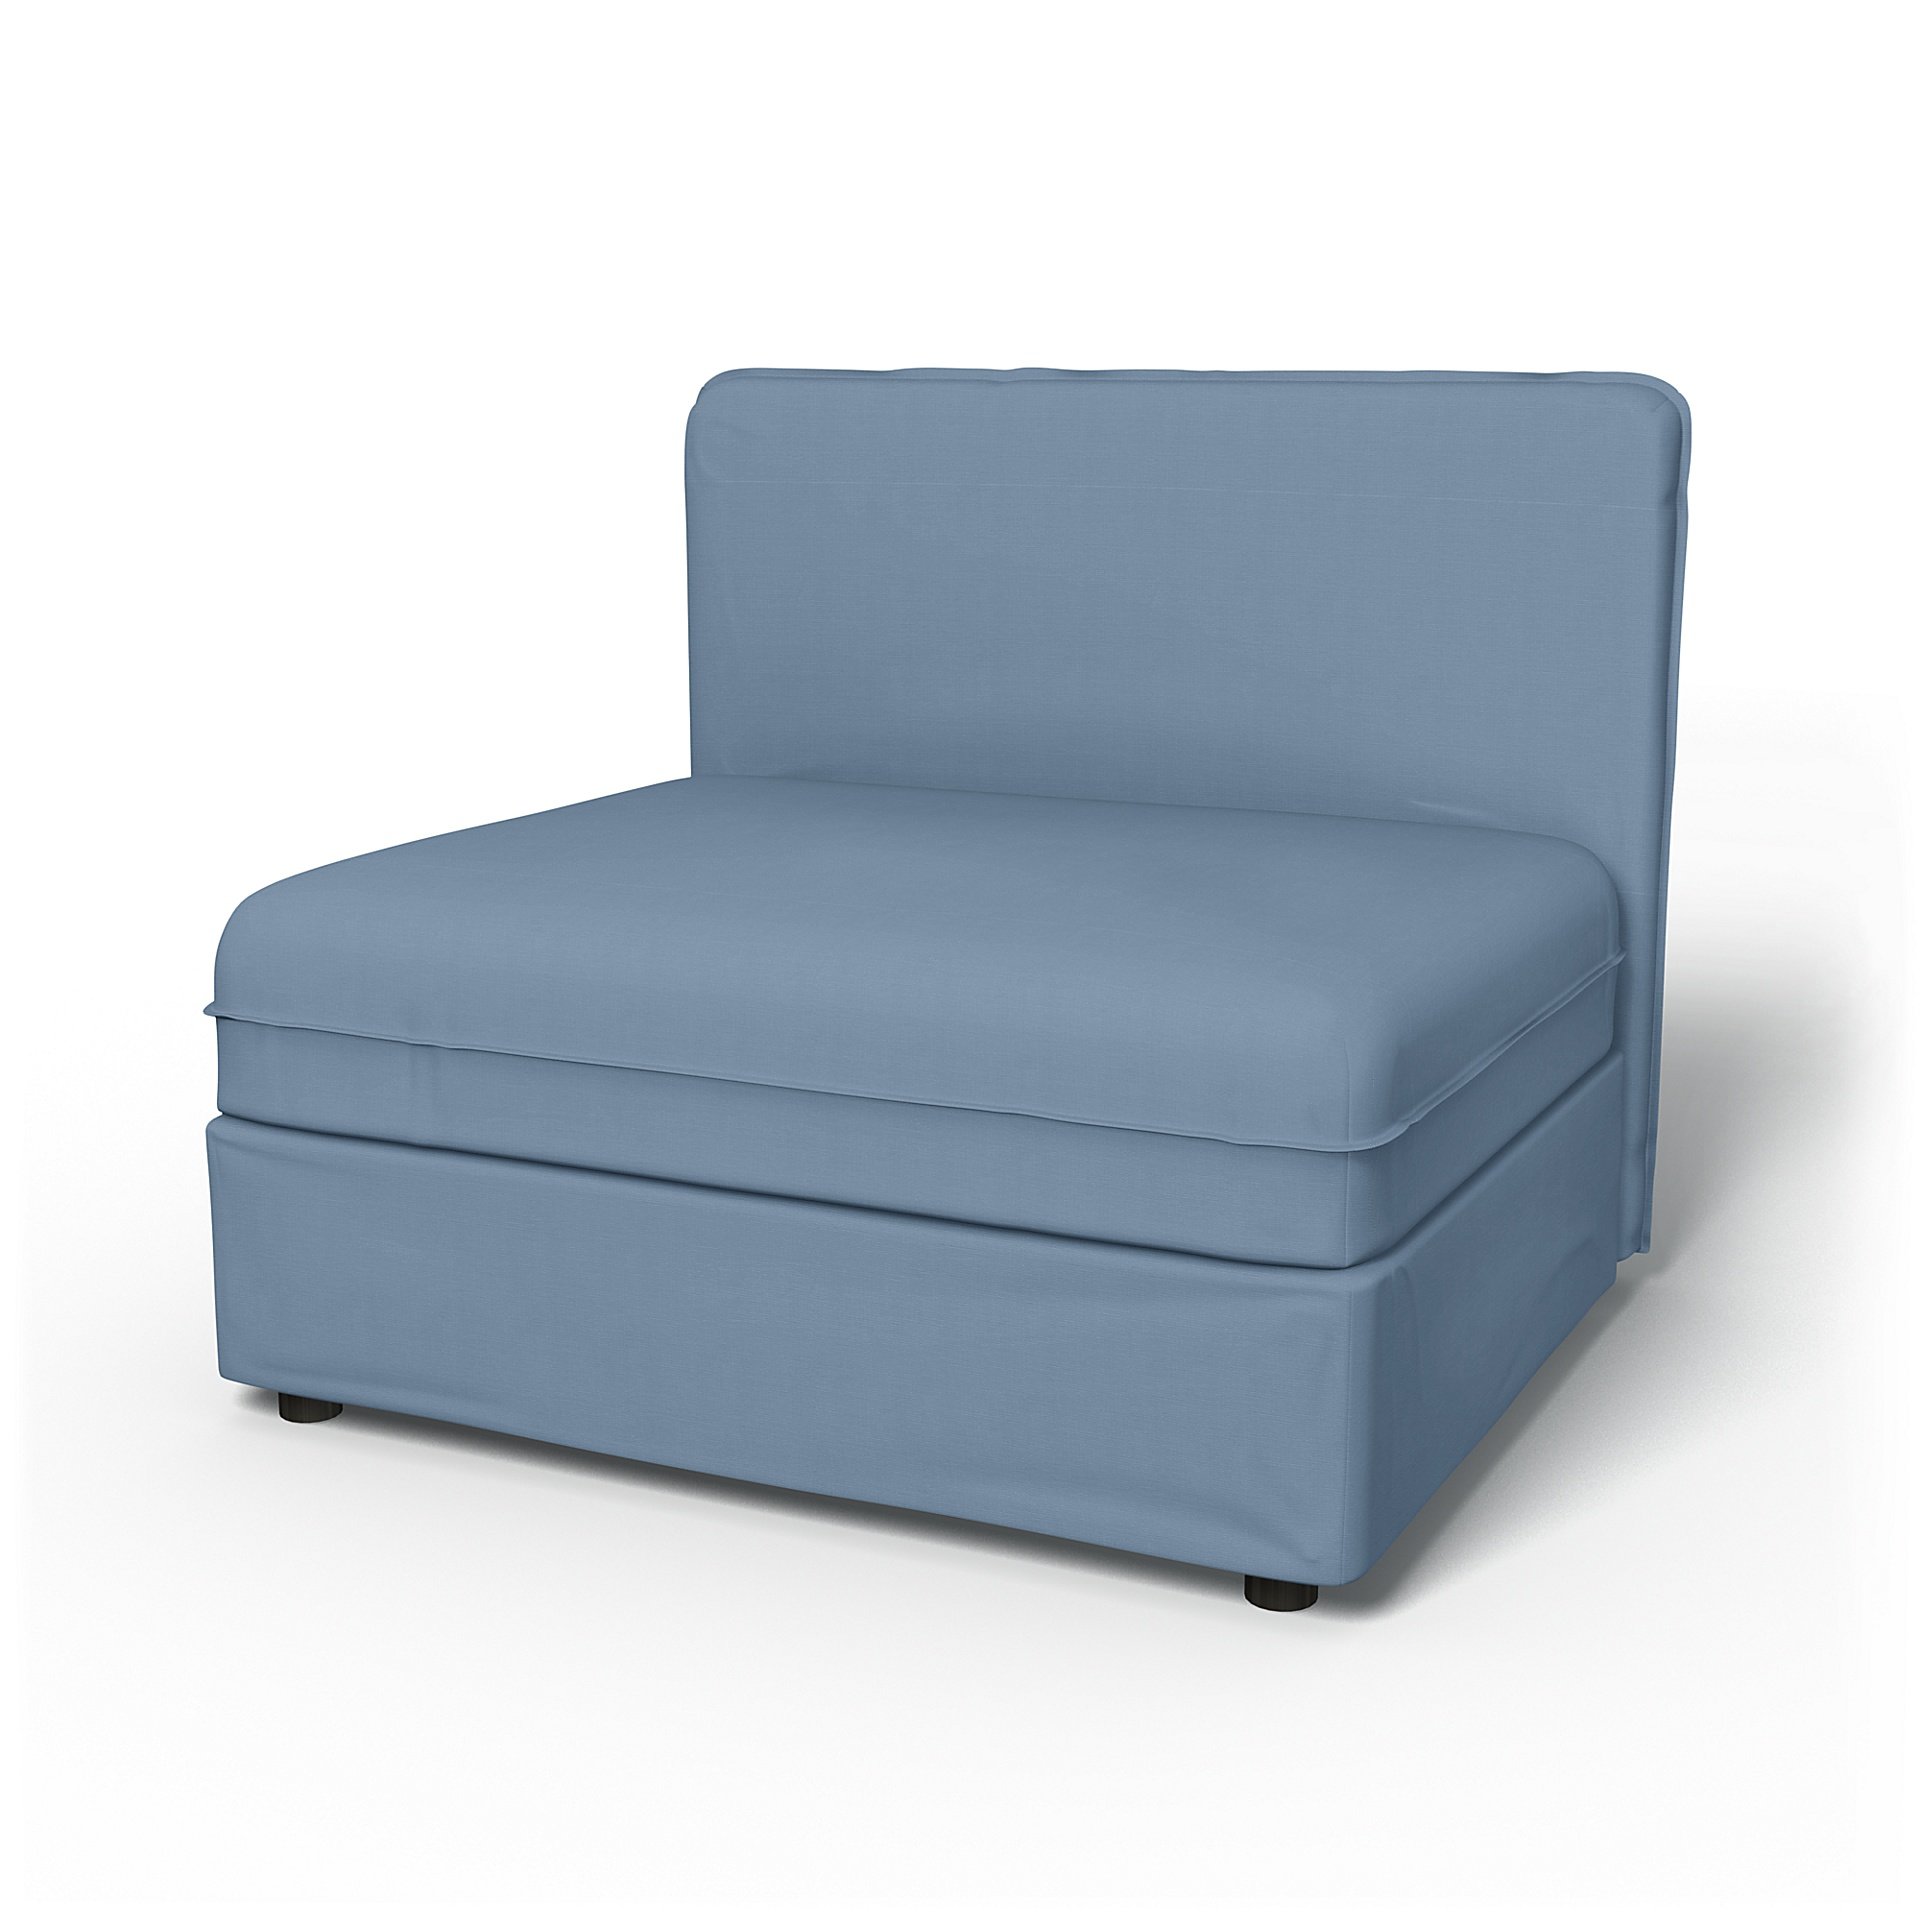 IKEA - Vallentuna Seat Module with Low Back Cover 100x80cm 39x32in, Dusty Blue, Cotton - Bemz